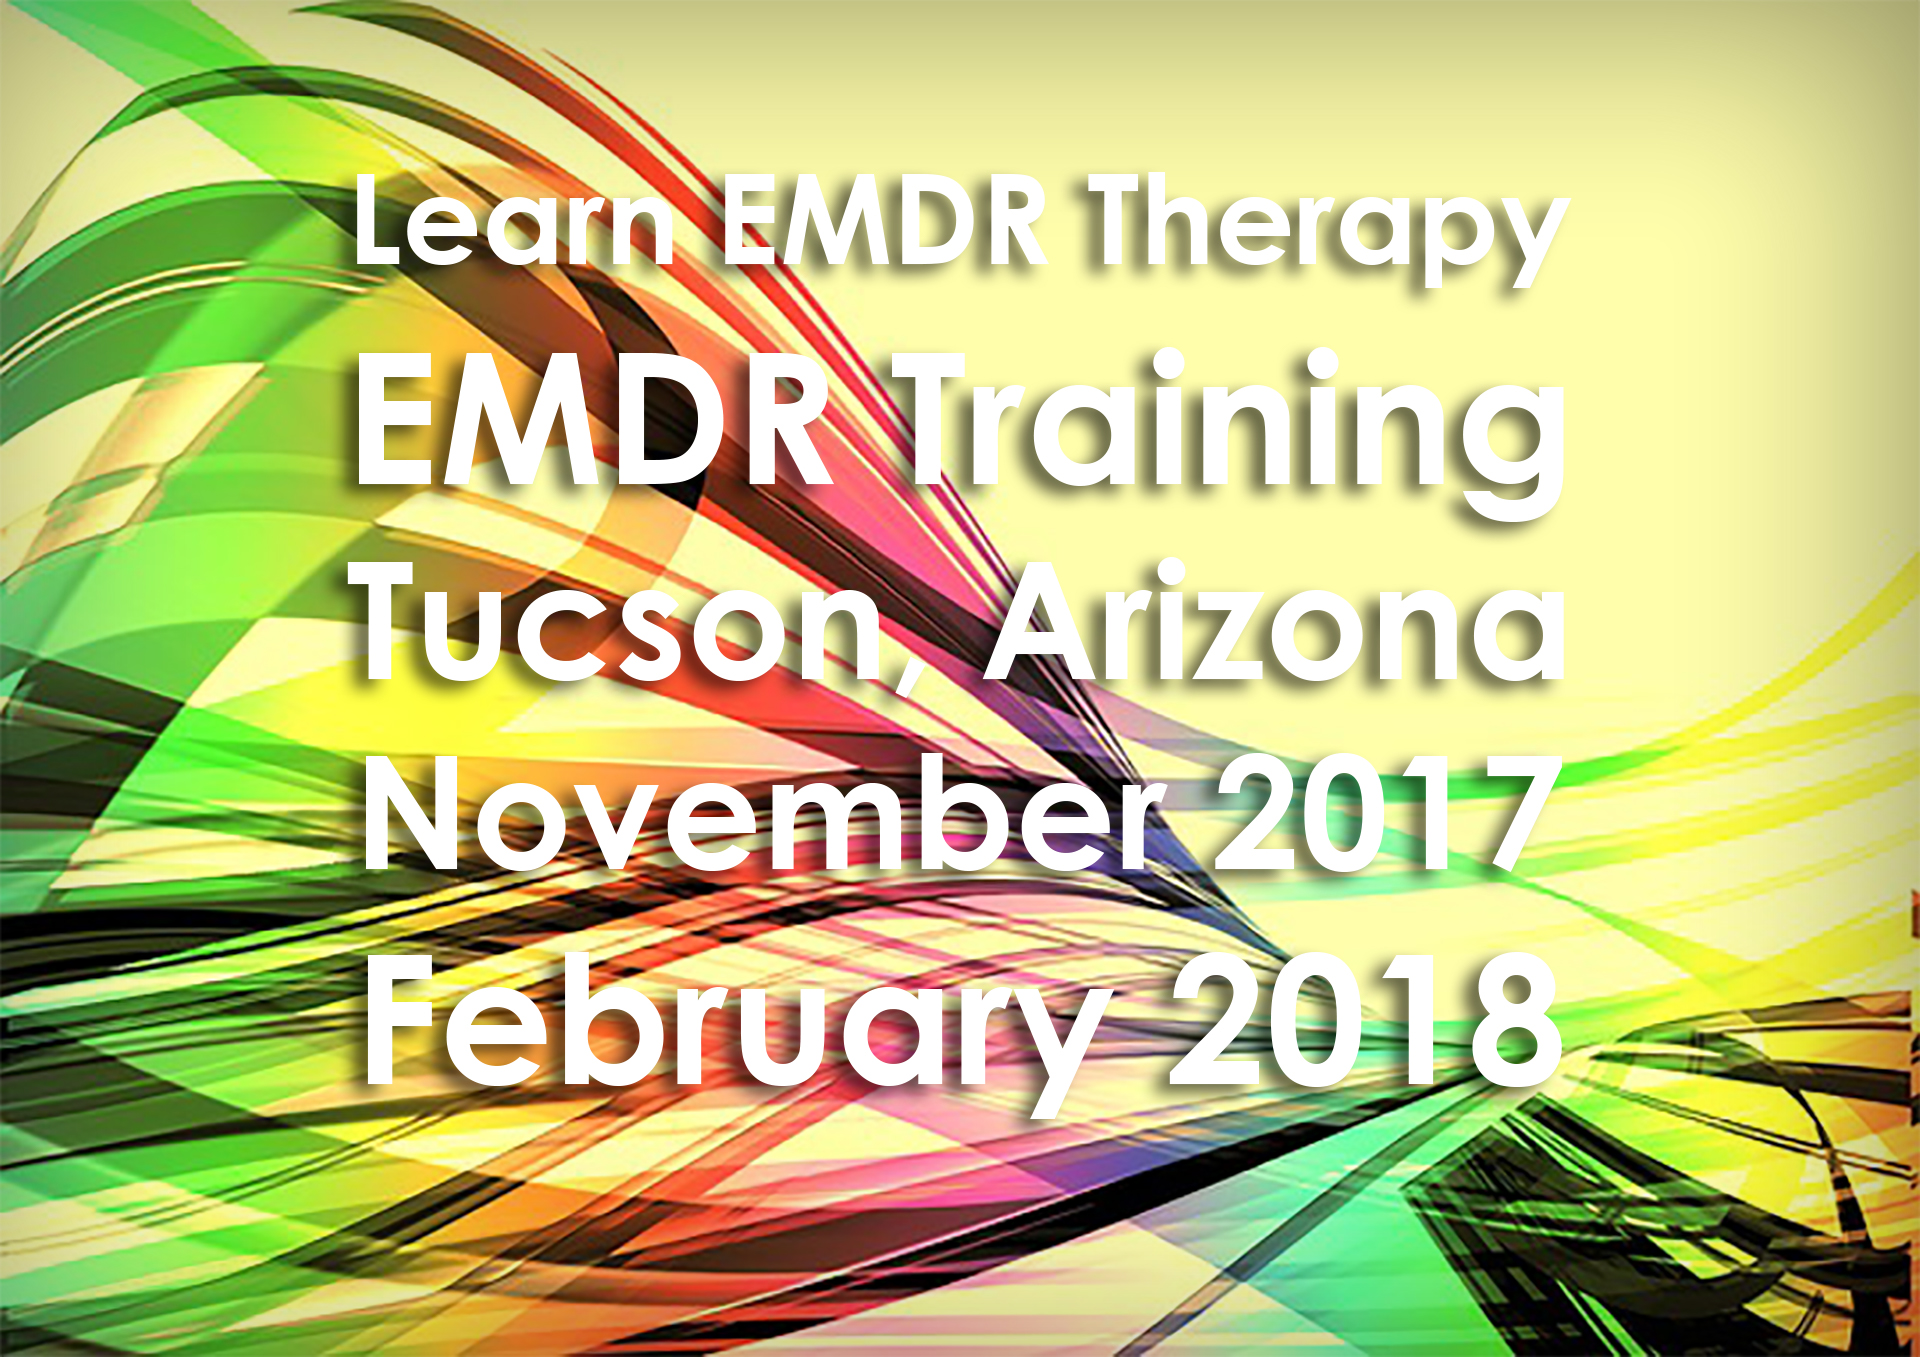 Learn EMDR Therapy EMDR Training in Tucson, Arizona November 2017 and